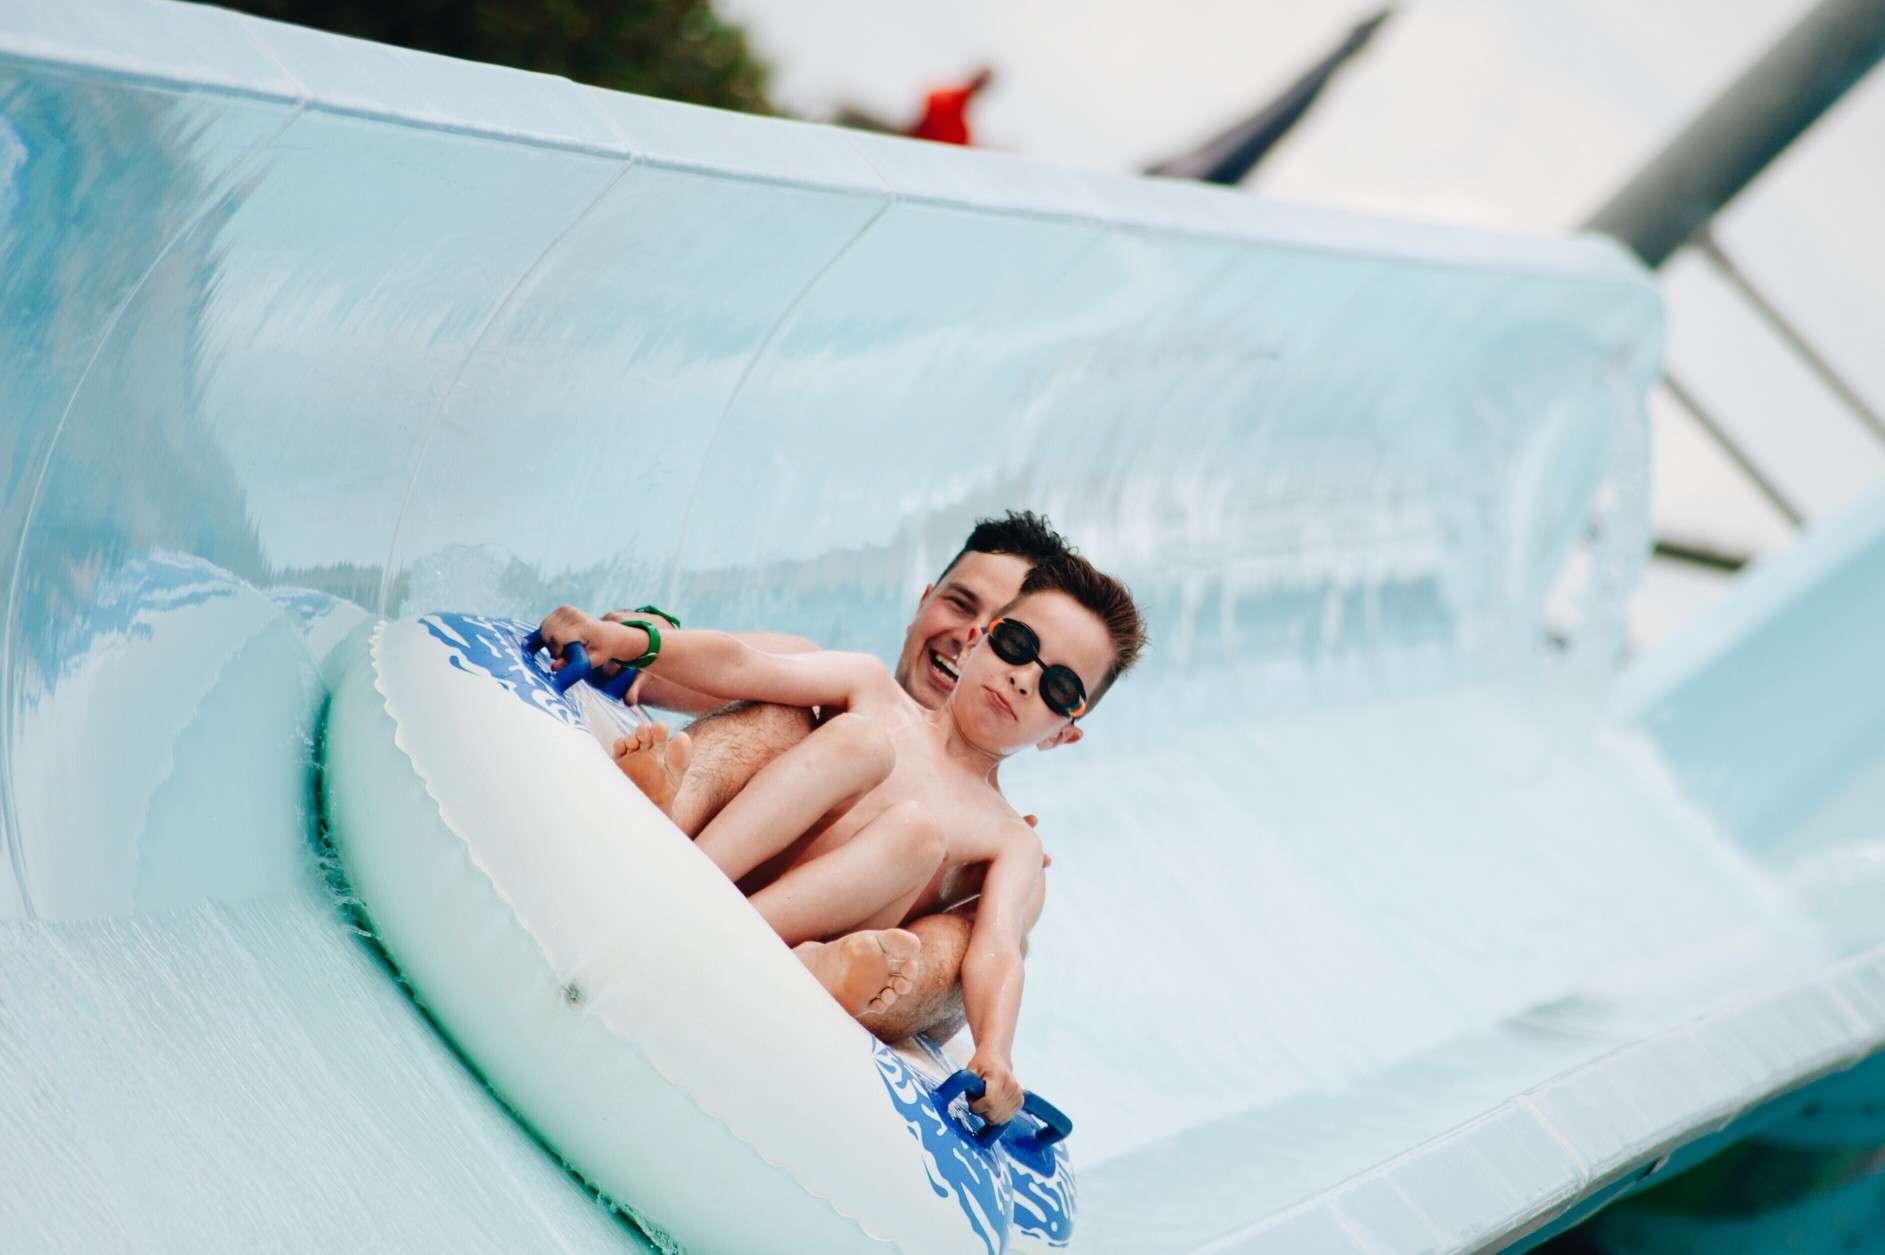 Father and sun sliding down water slide.